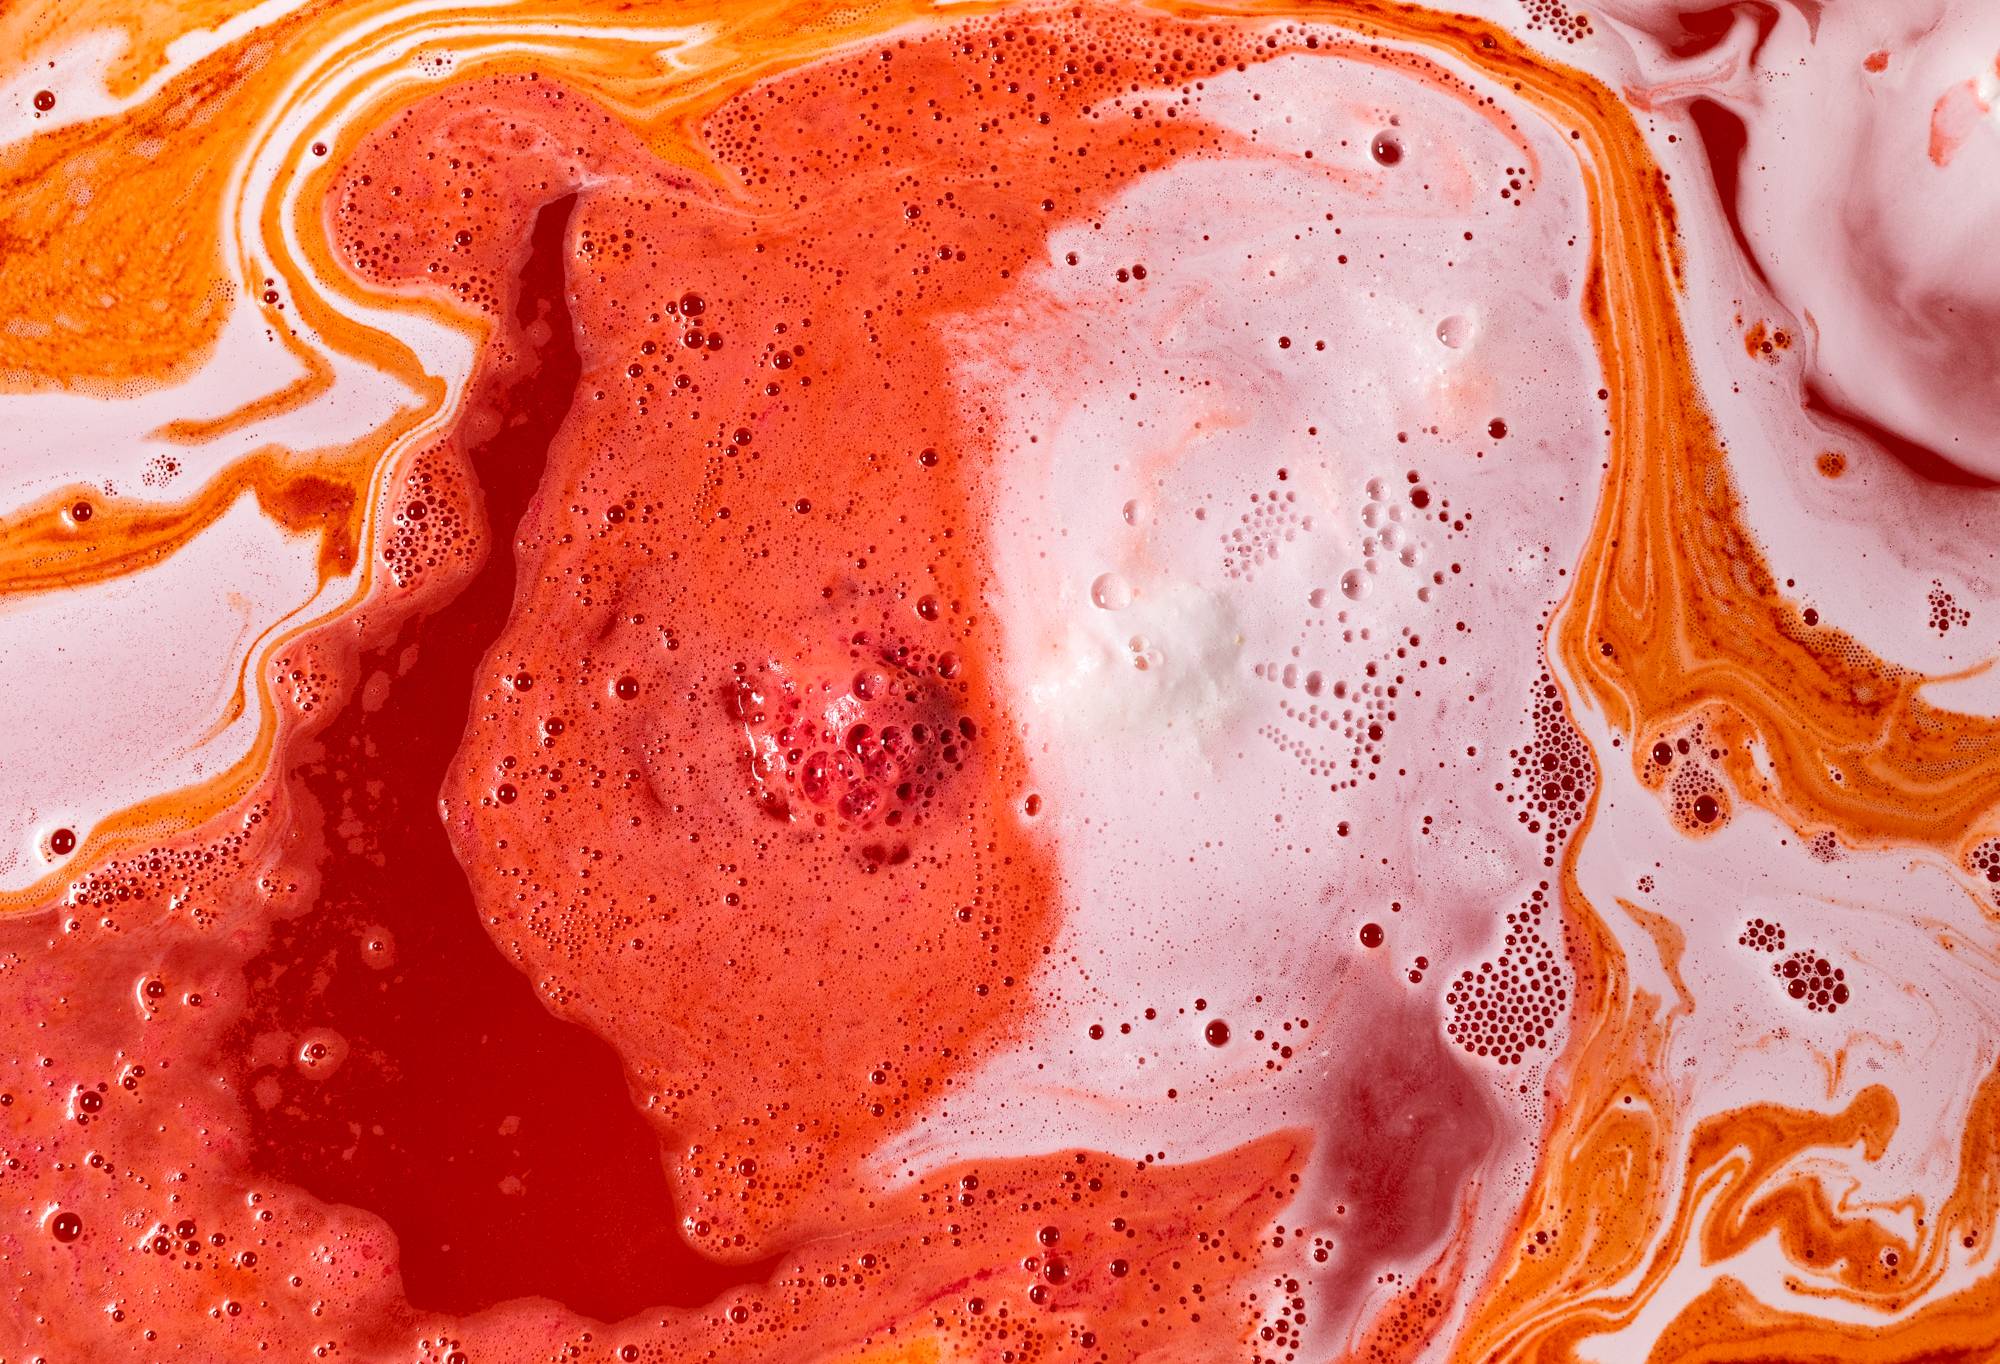 Human-Human Fruit bath bomb transforming waters into magnificent white, orange and red fizzing swirls.